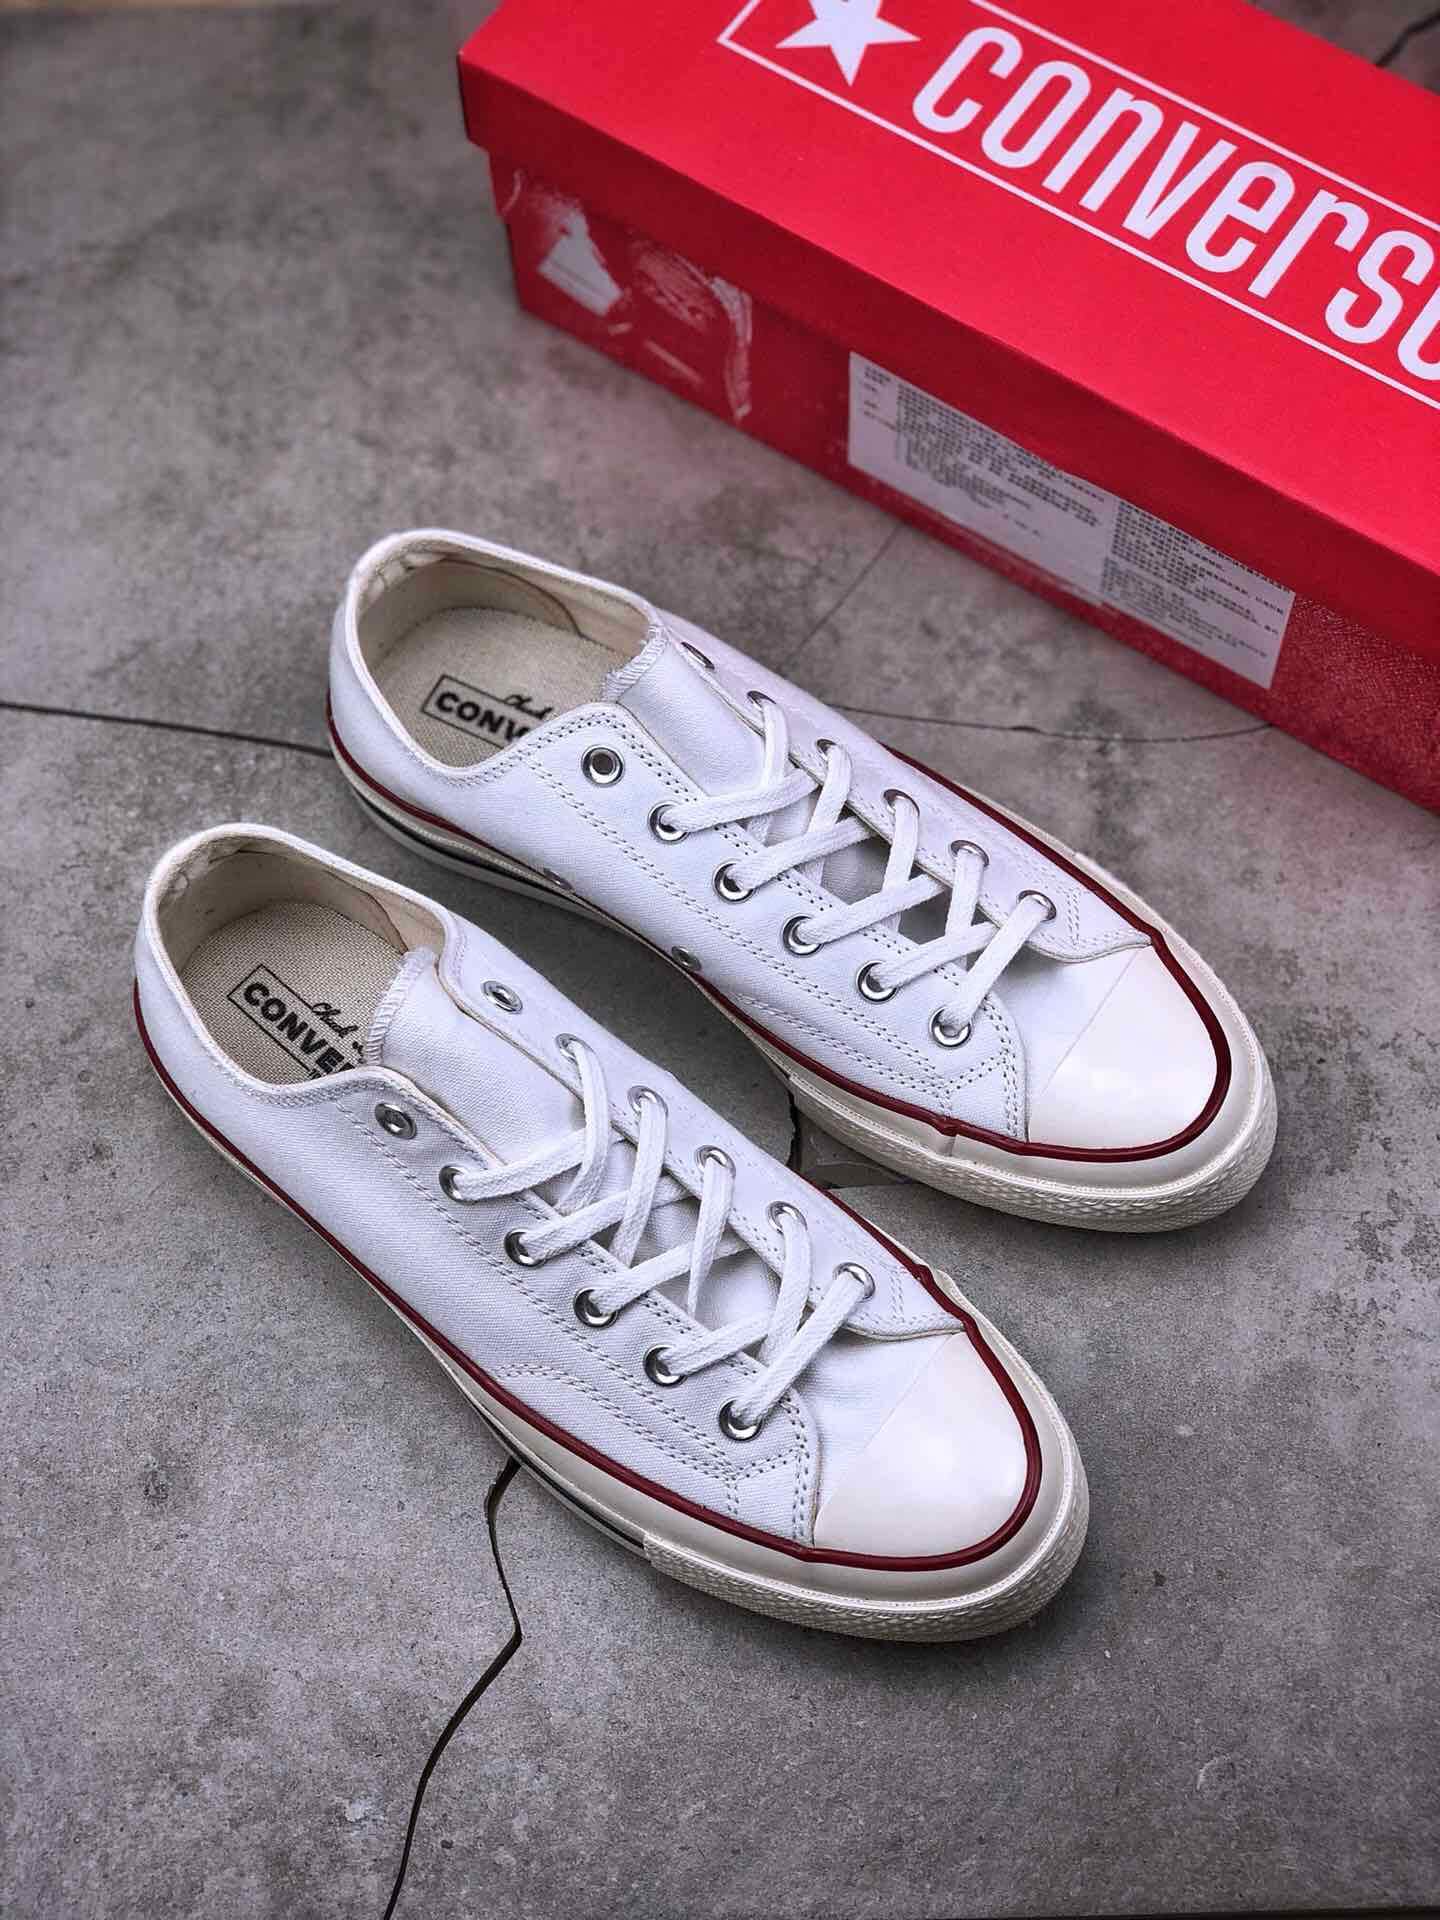 Converse 1970s full trắng